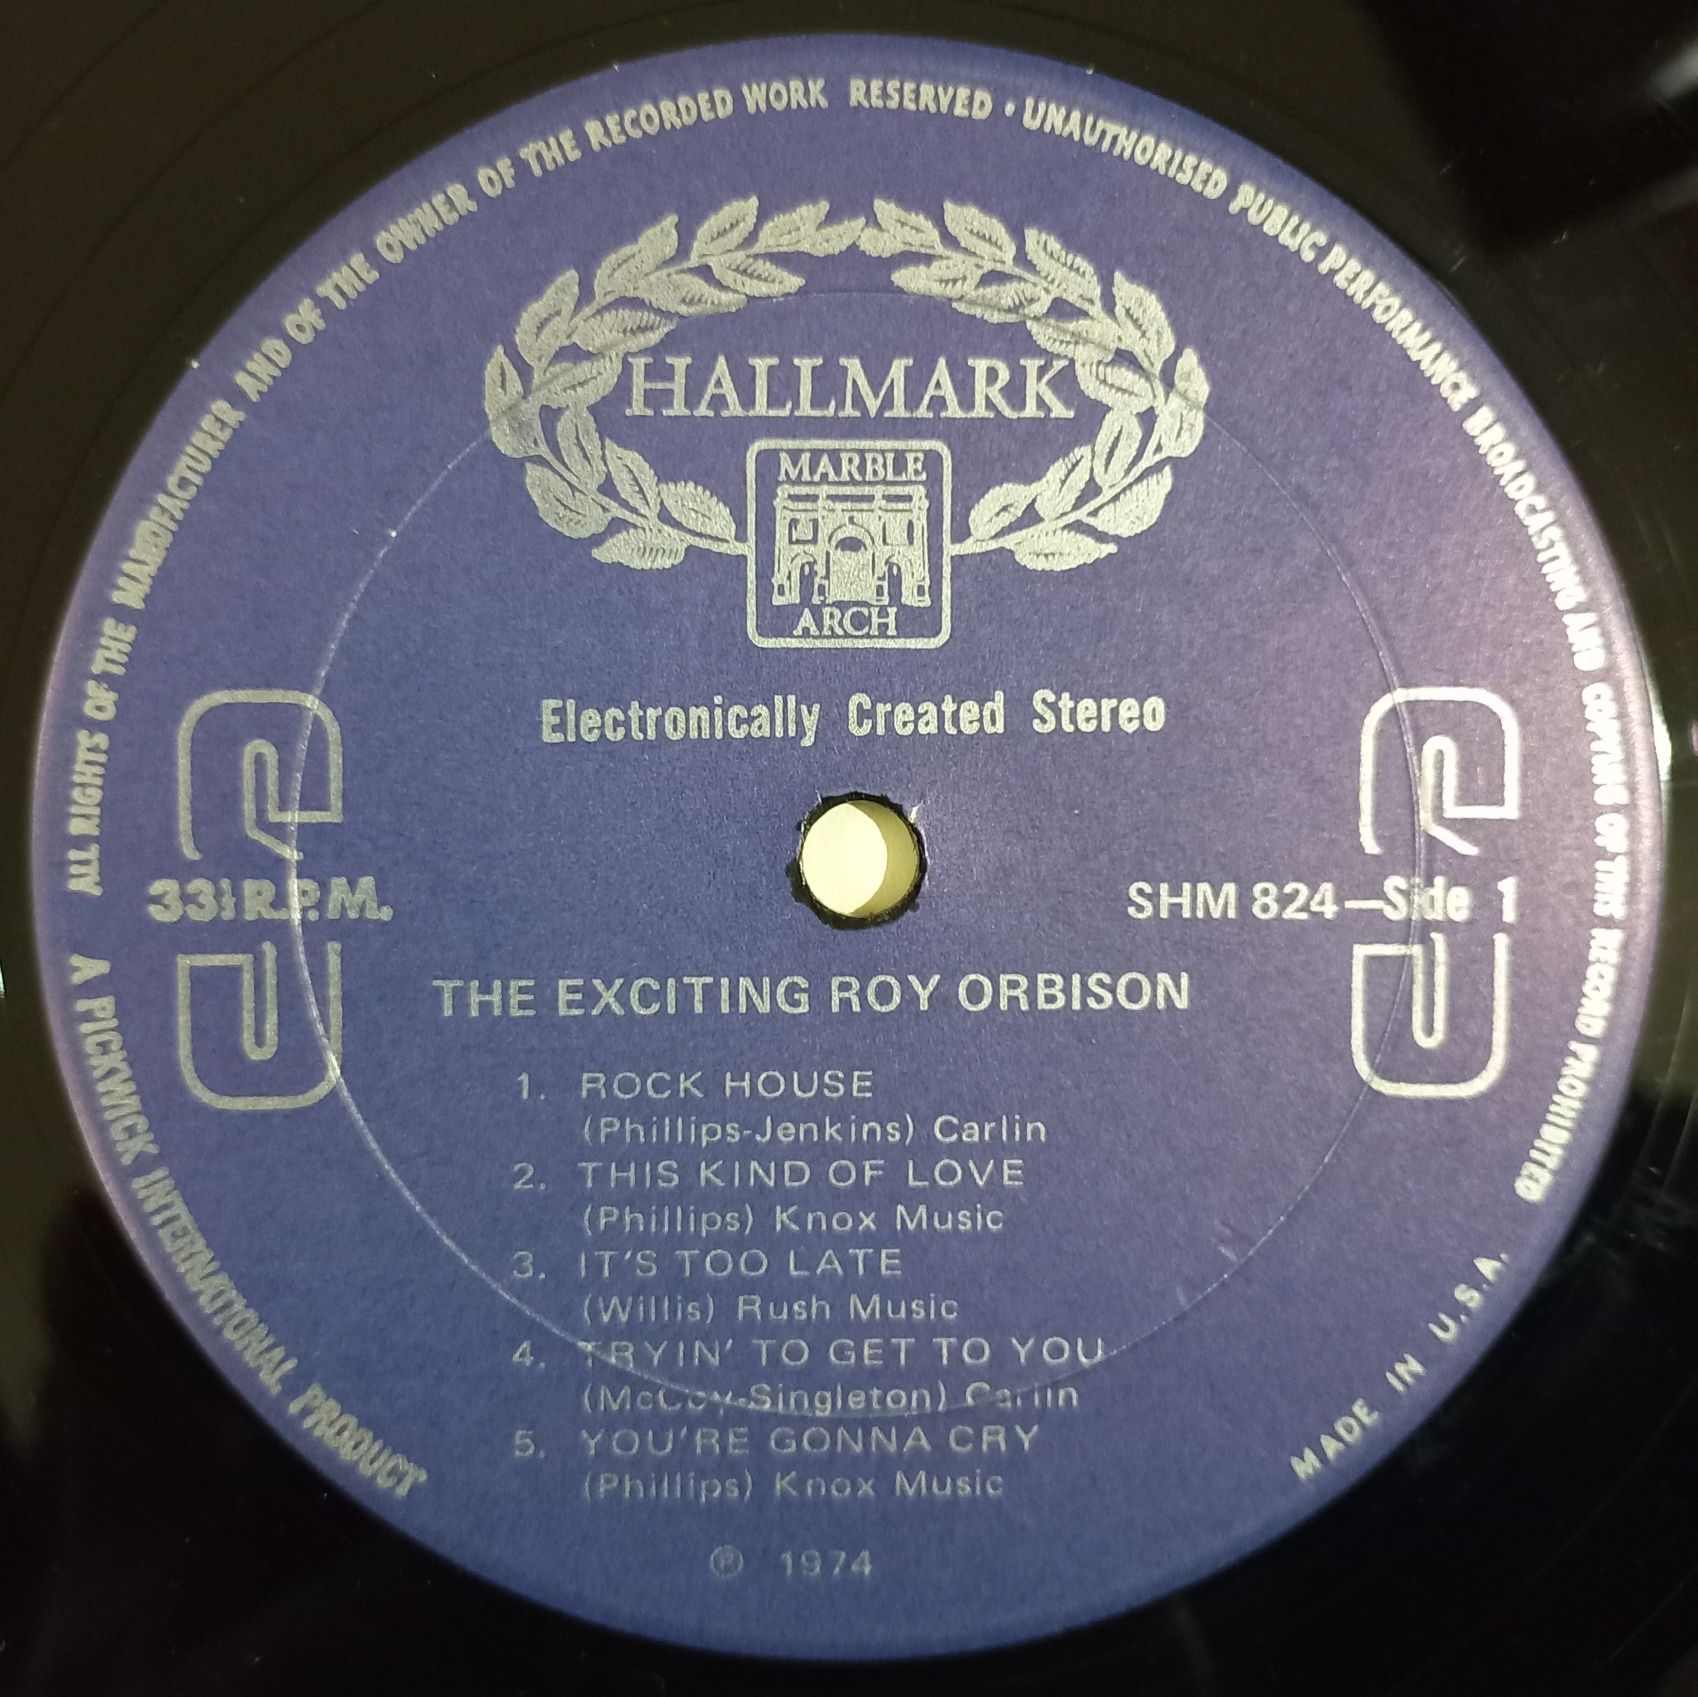 The Exciting Roy Orbison